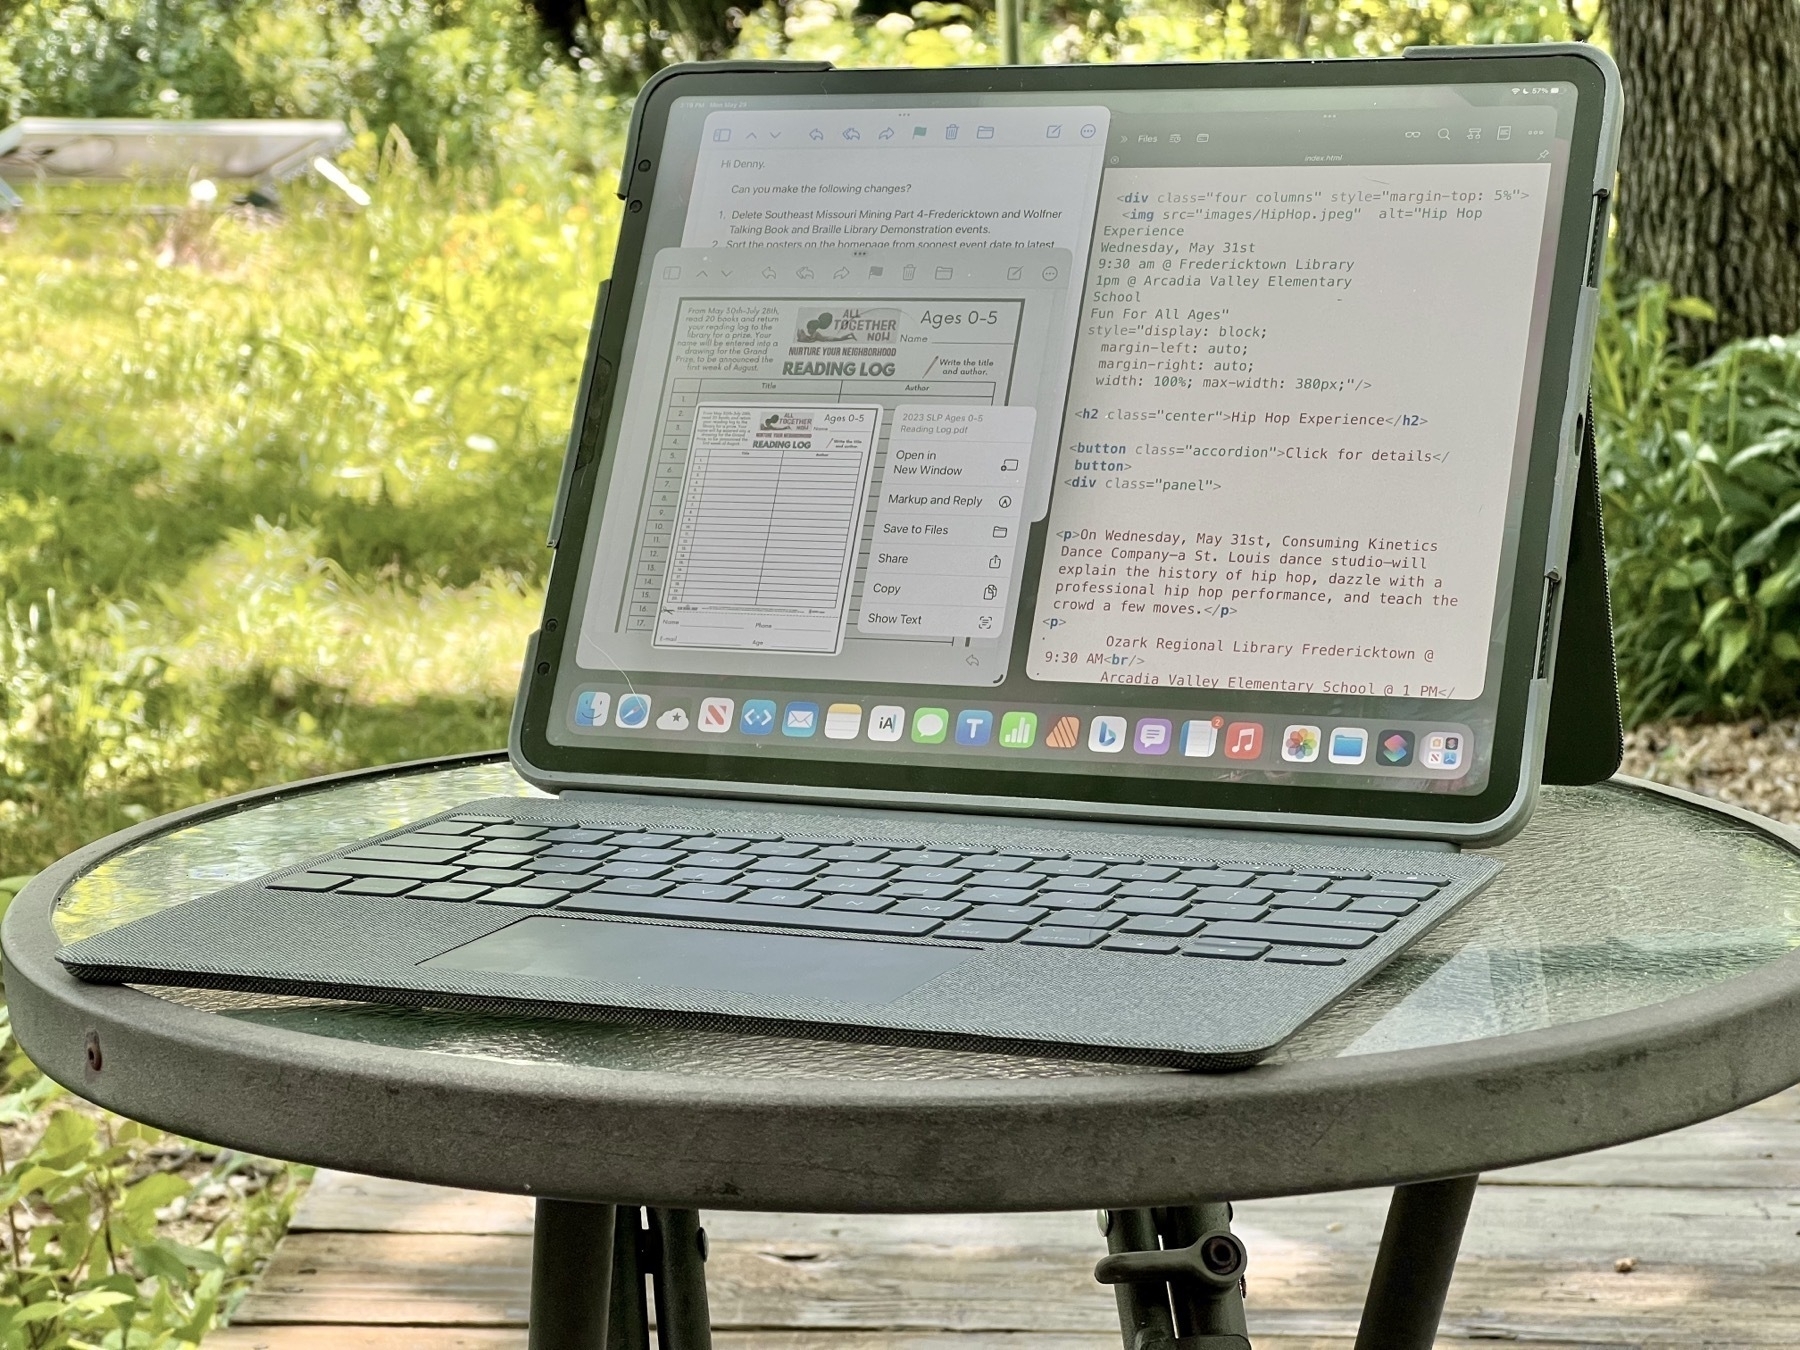 Photo of an iPad sitting on a glass topped table. The photo is taken outside against a blurred green background